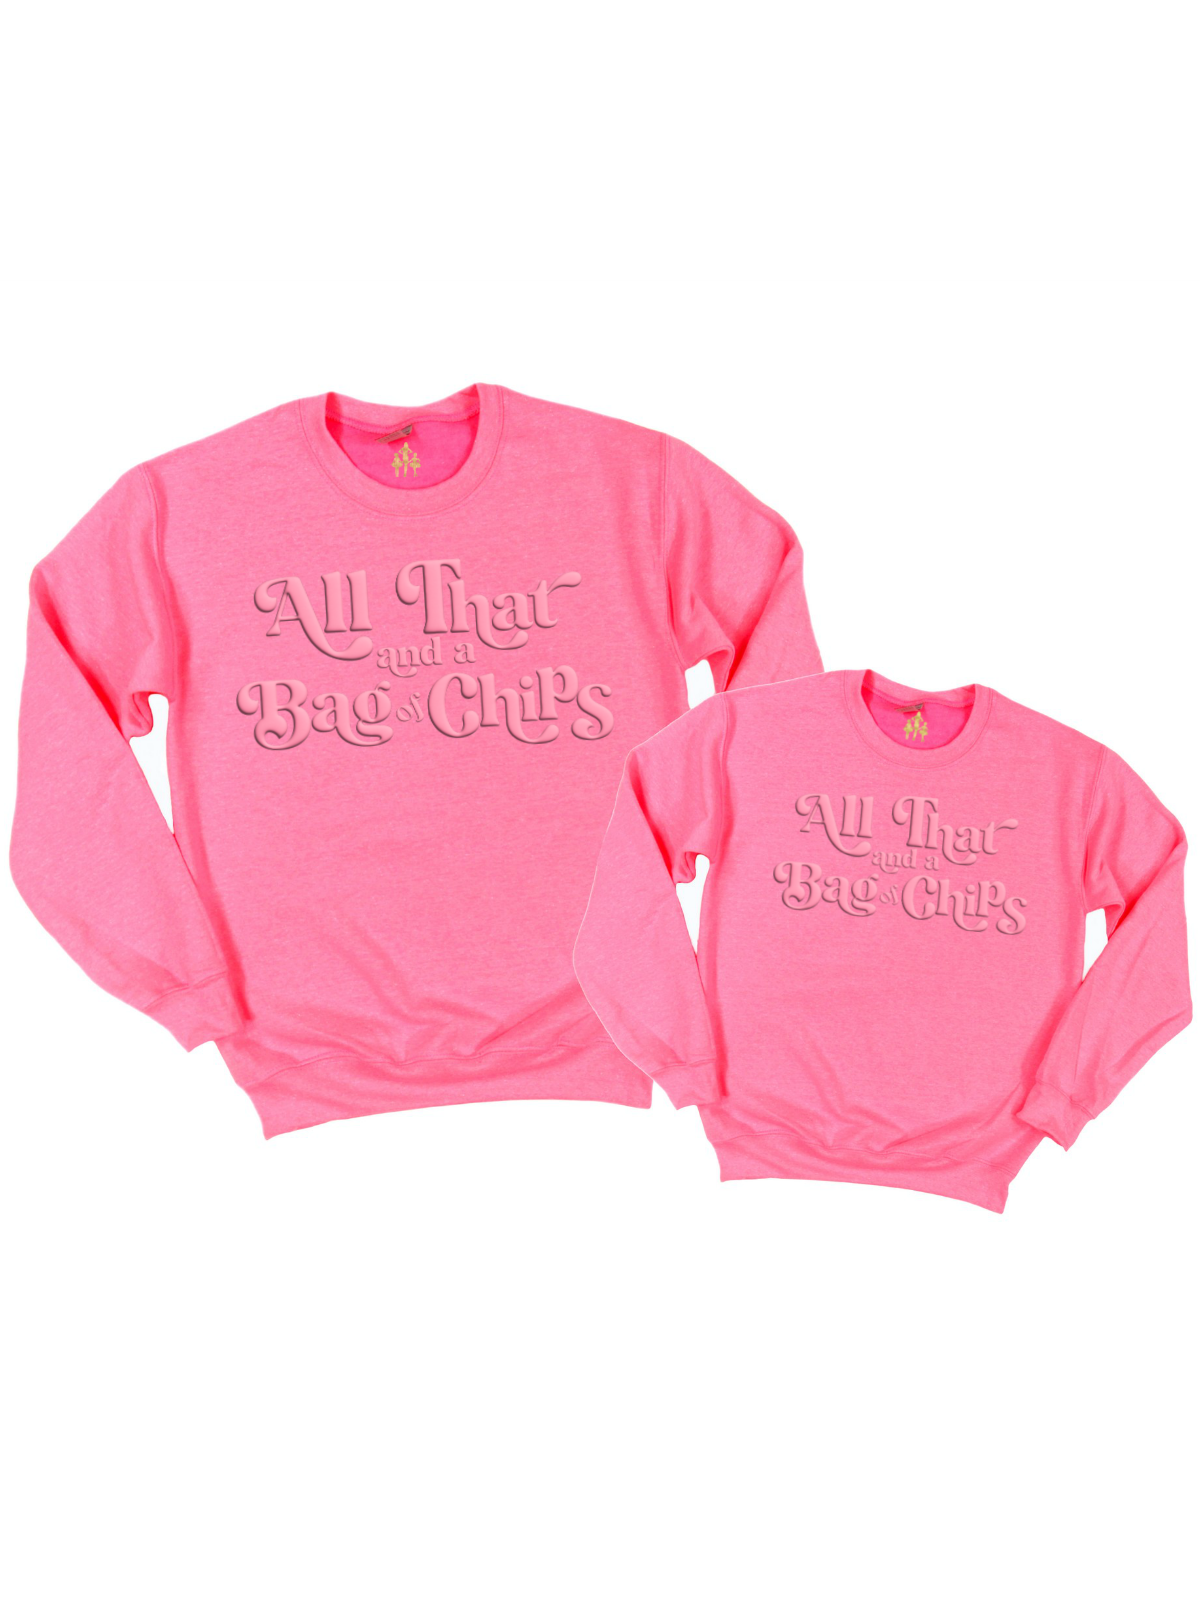 All That and a Bag of Chips Matching Mommy and Me Sweatshirts in Pink